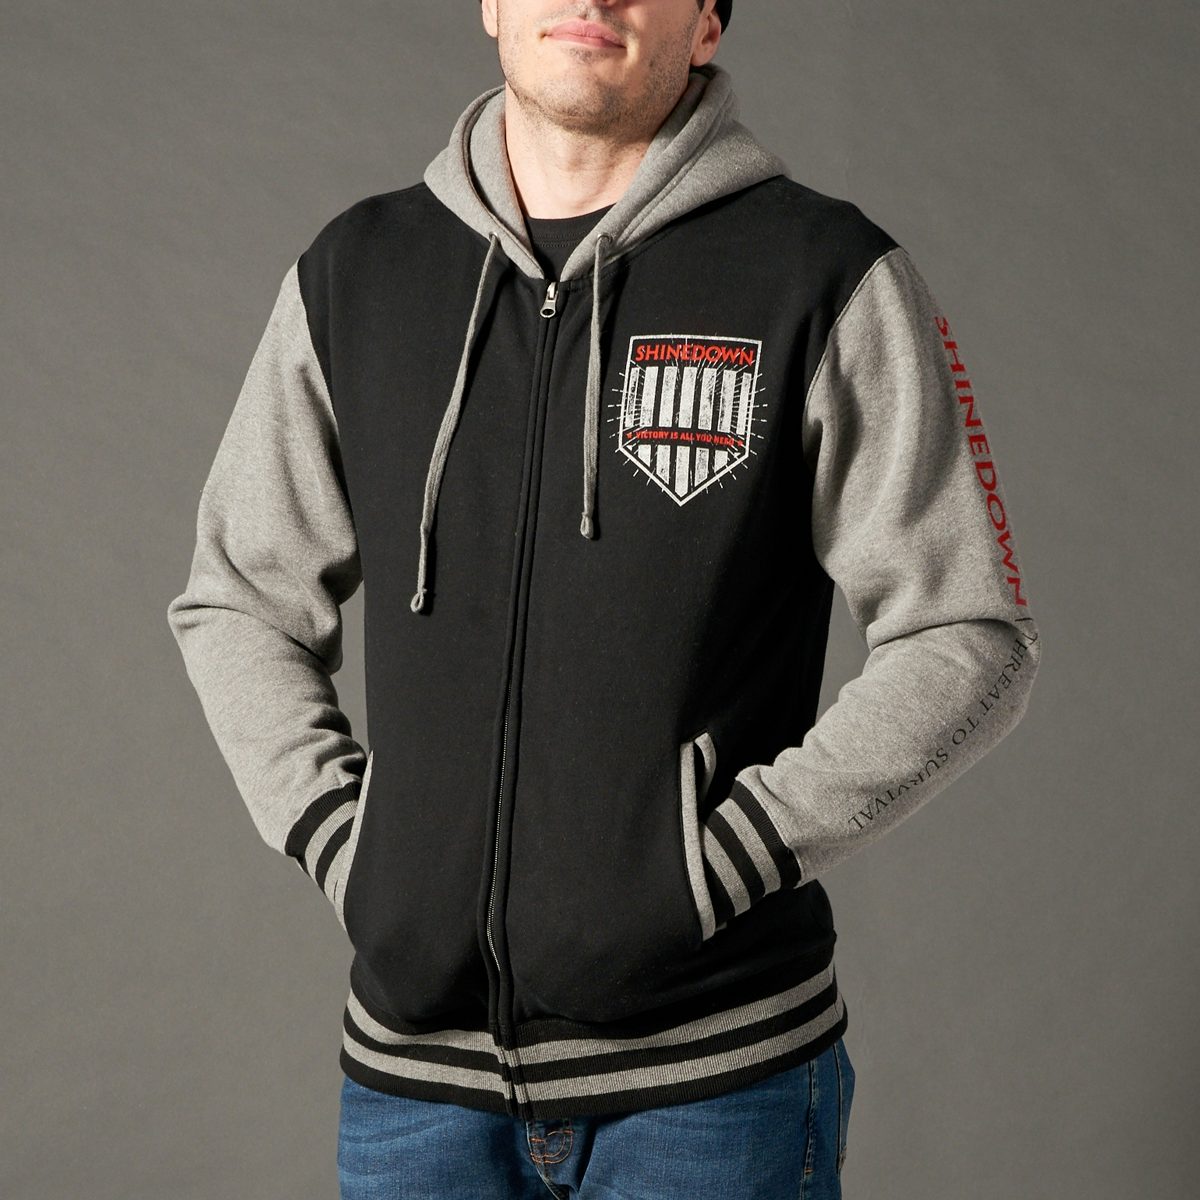 shinedown attention attention hoodie